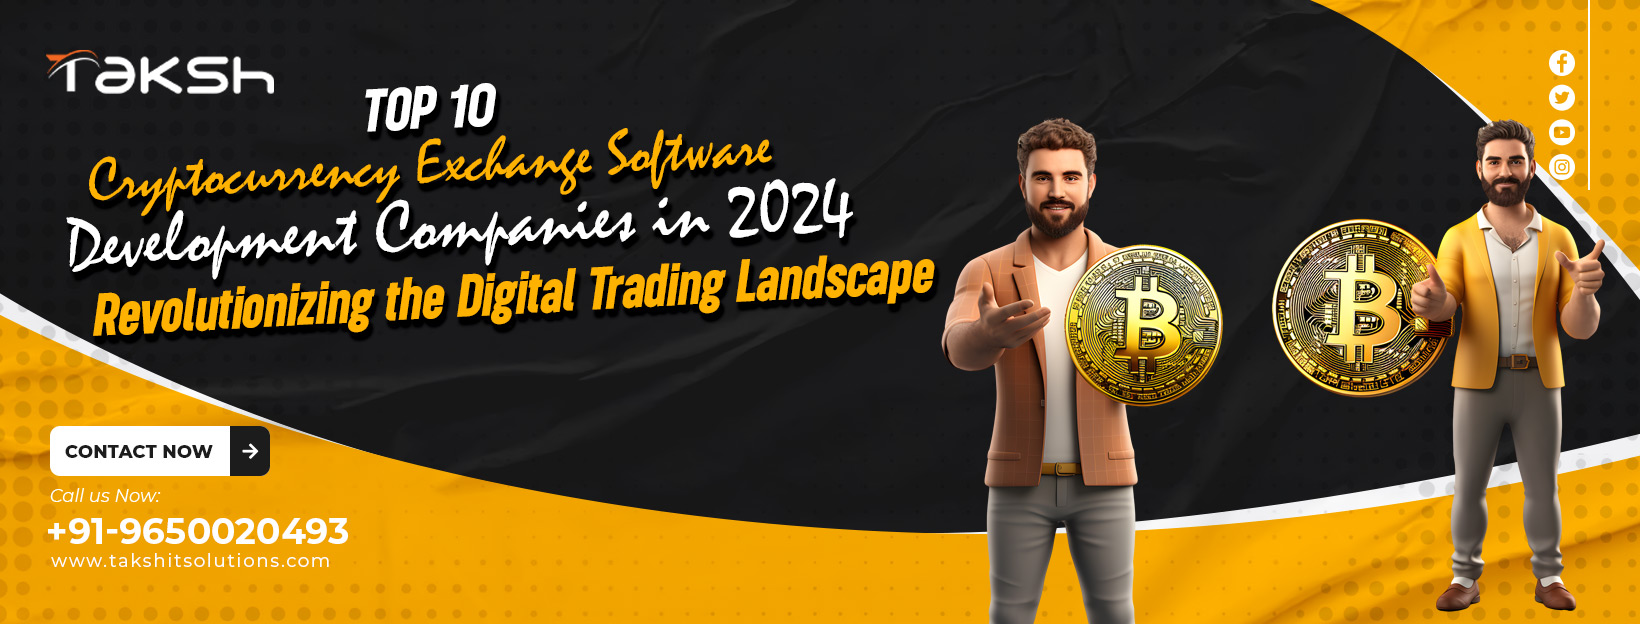 Top 10 Cryptocurrency Exchange Software Development Companies in 2024: Revolutionizing the Digital Trading Landscape